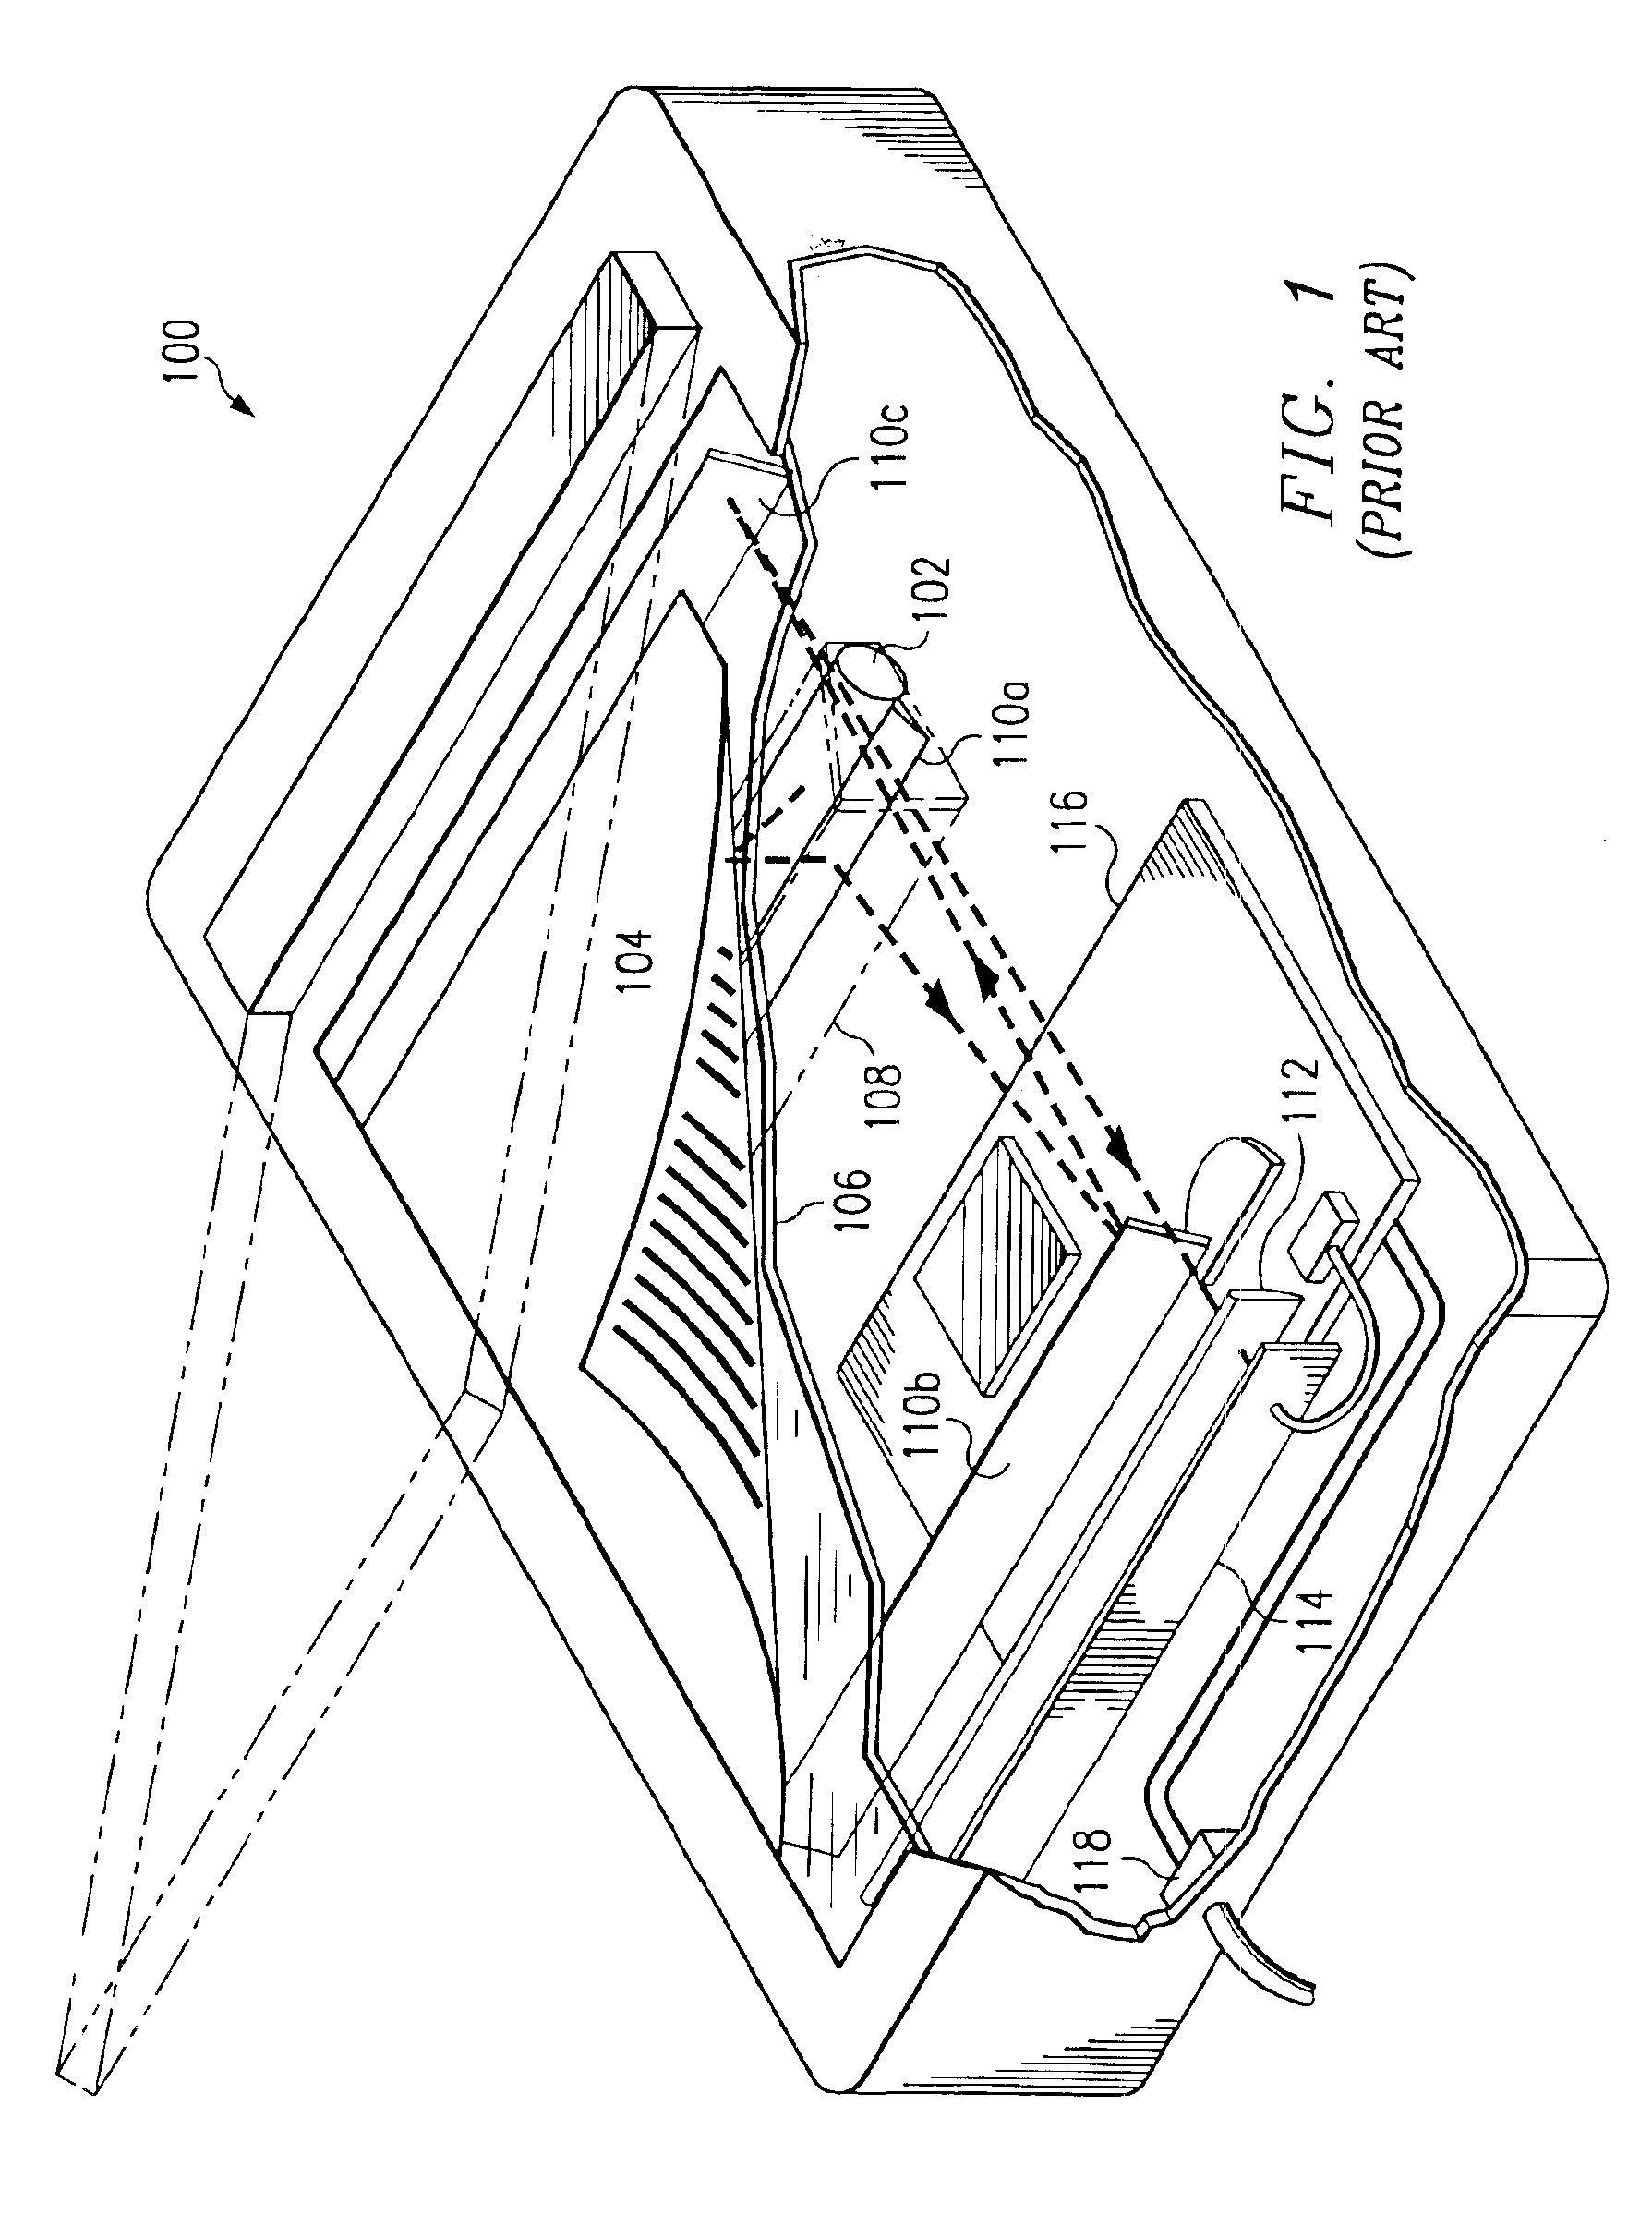 Method and system for scanning an image using a look-down linear array scanner